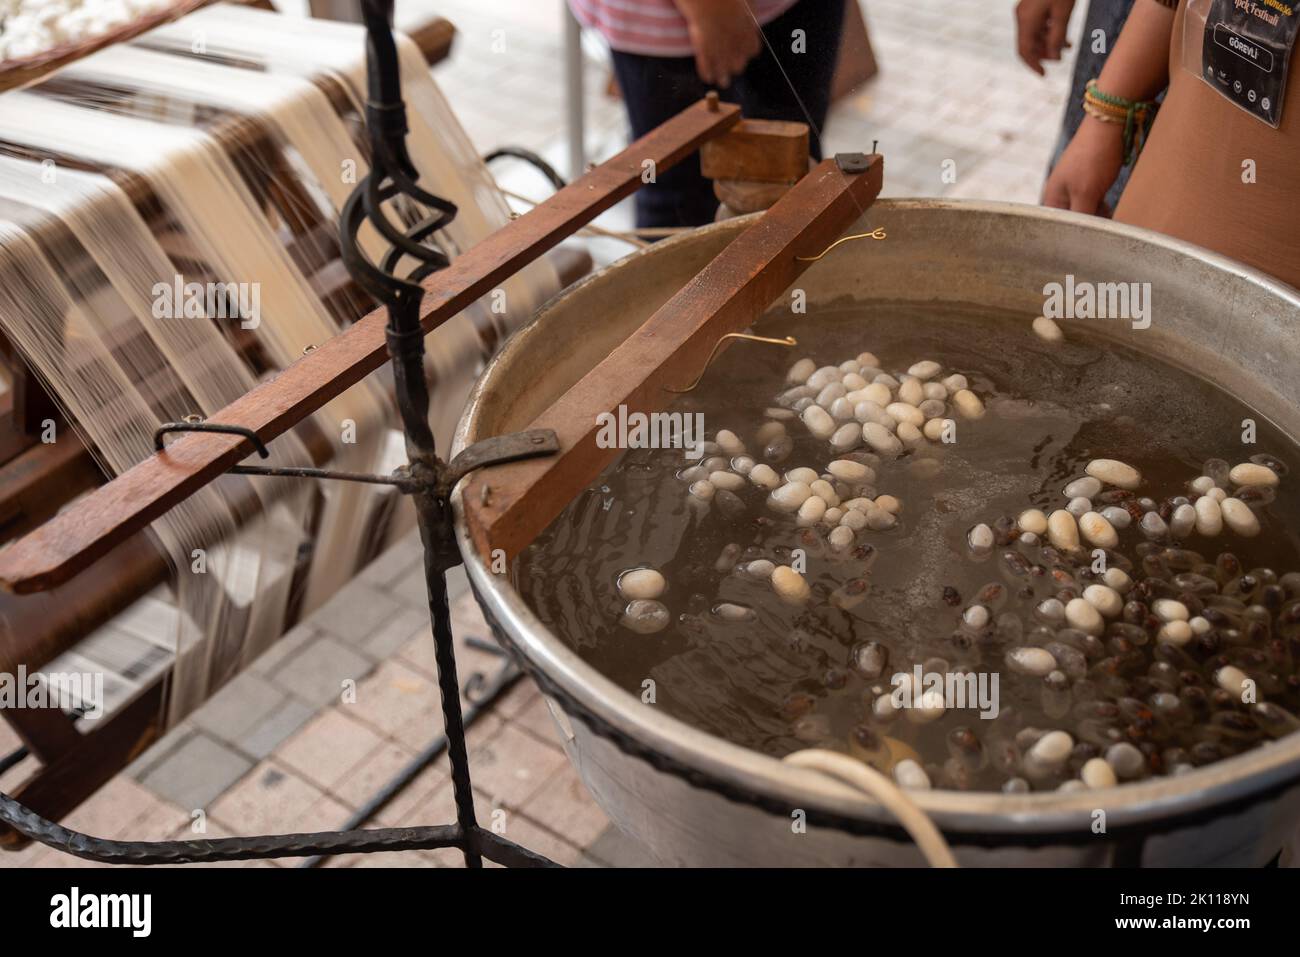 cocoons of white silkworms bred to produce silk , raw silk Stock Photo